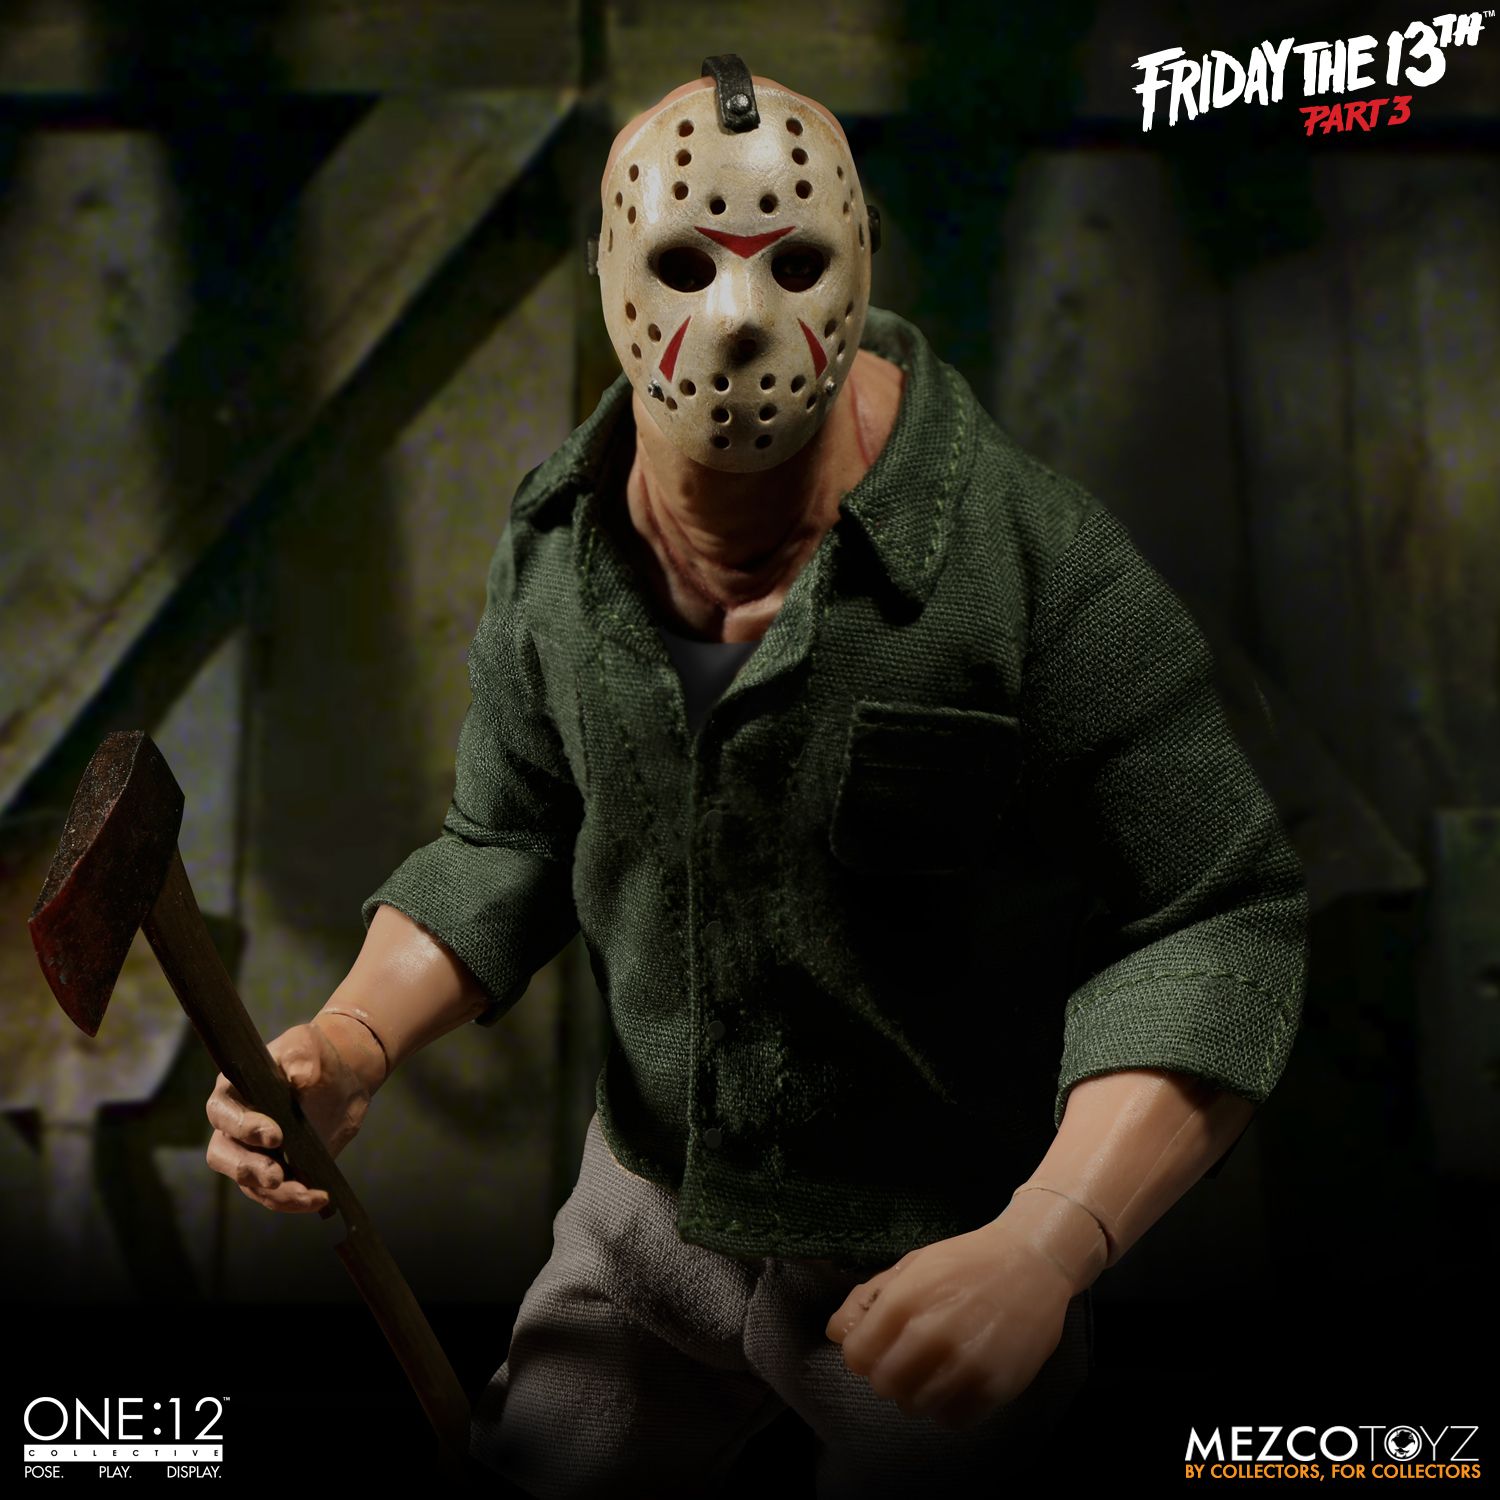 Mezco Toyz ONE:12 Collective Friday the 13th Part 3 Jason Voorhees Action Figure